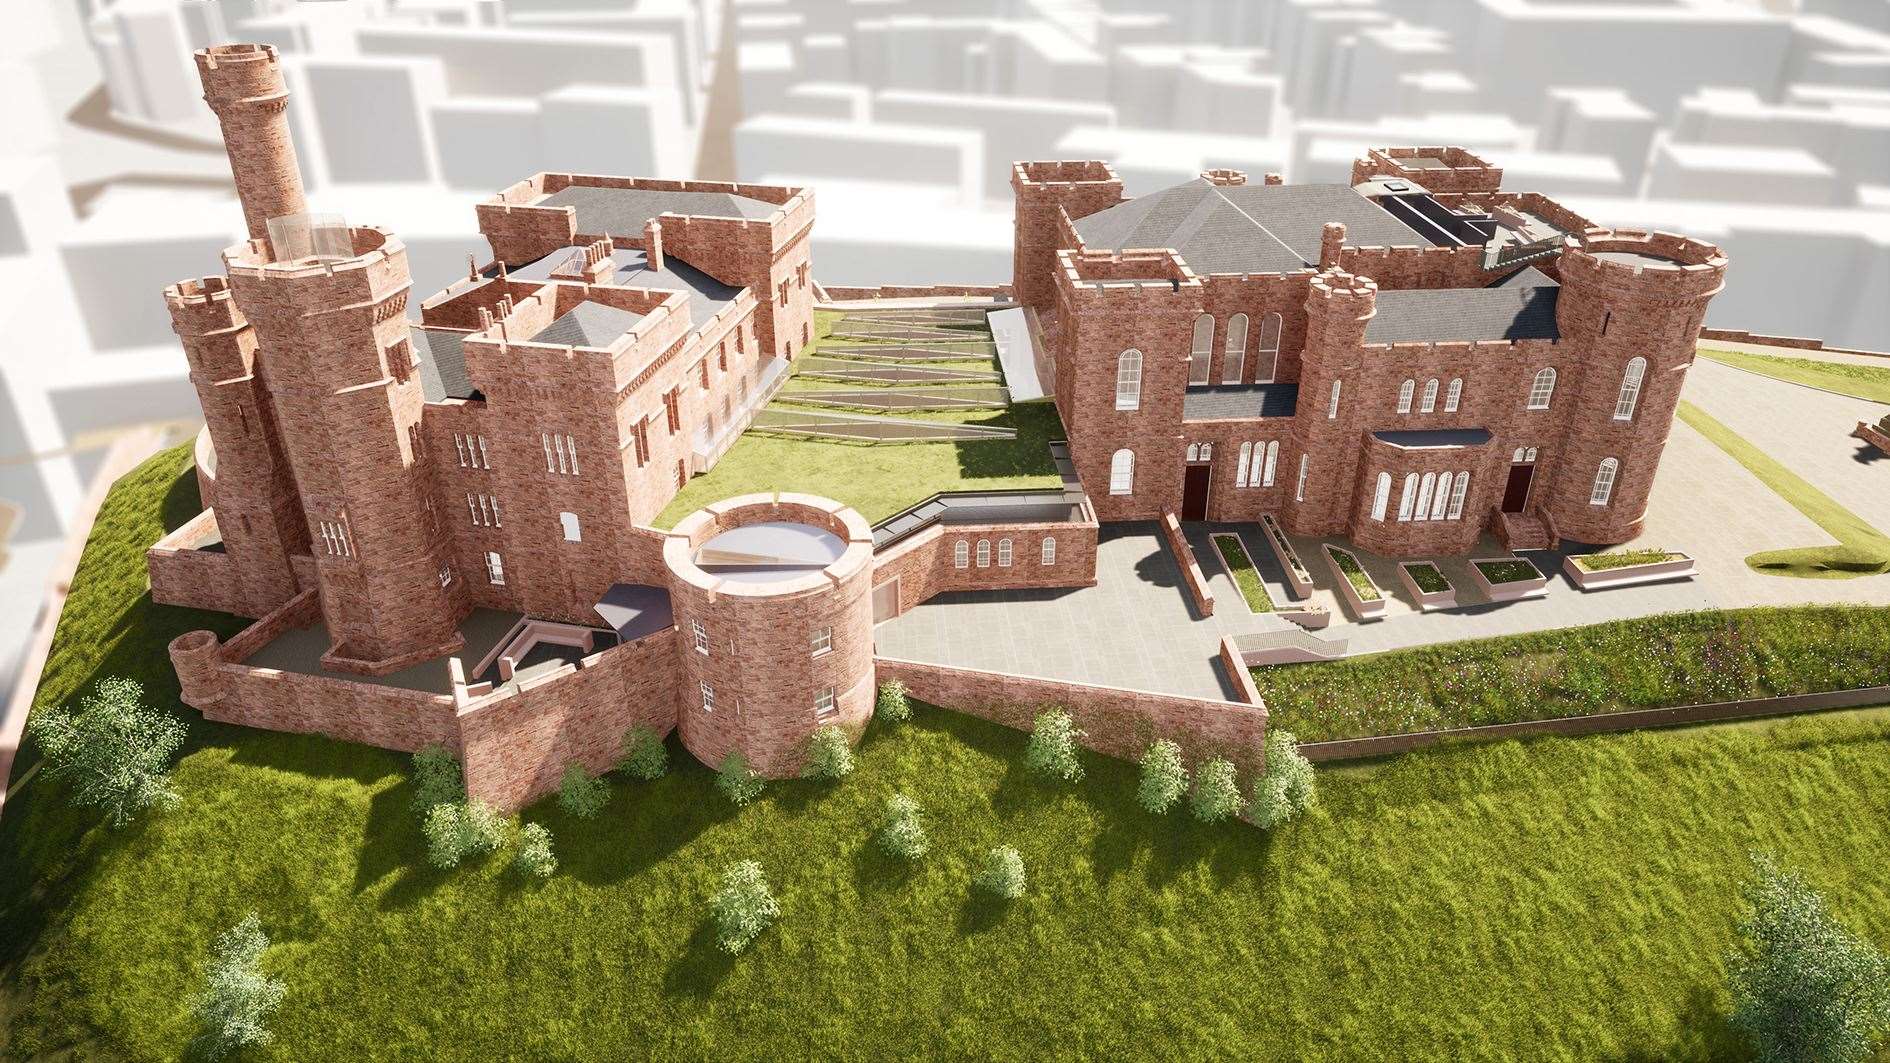 An artist’s impression of how Inverness Castle will look following the transformation.